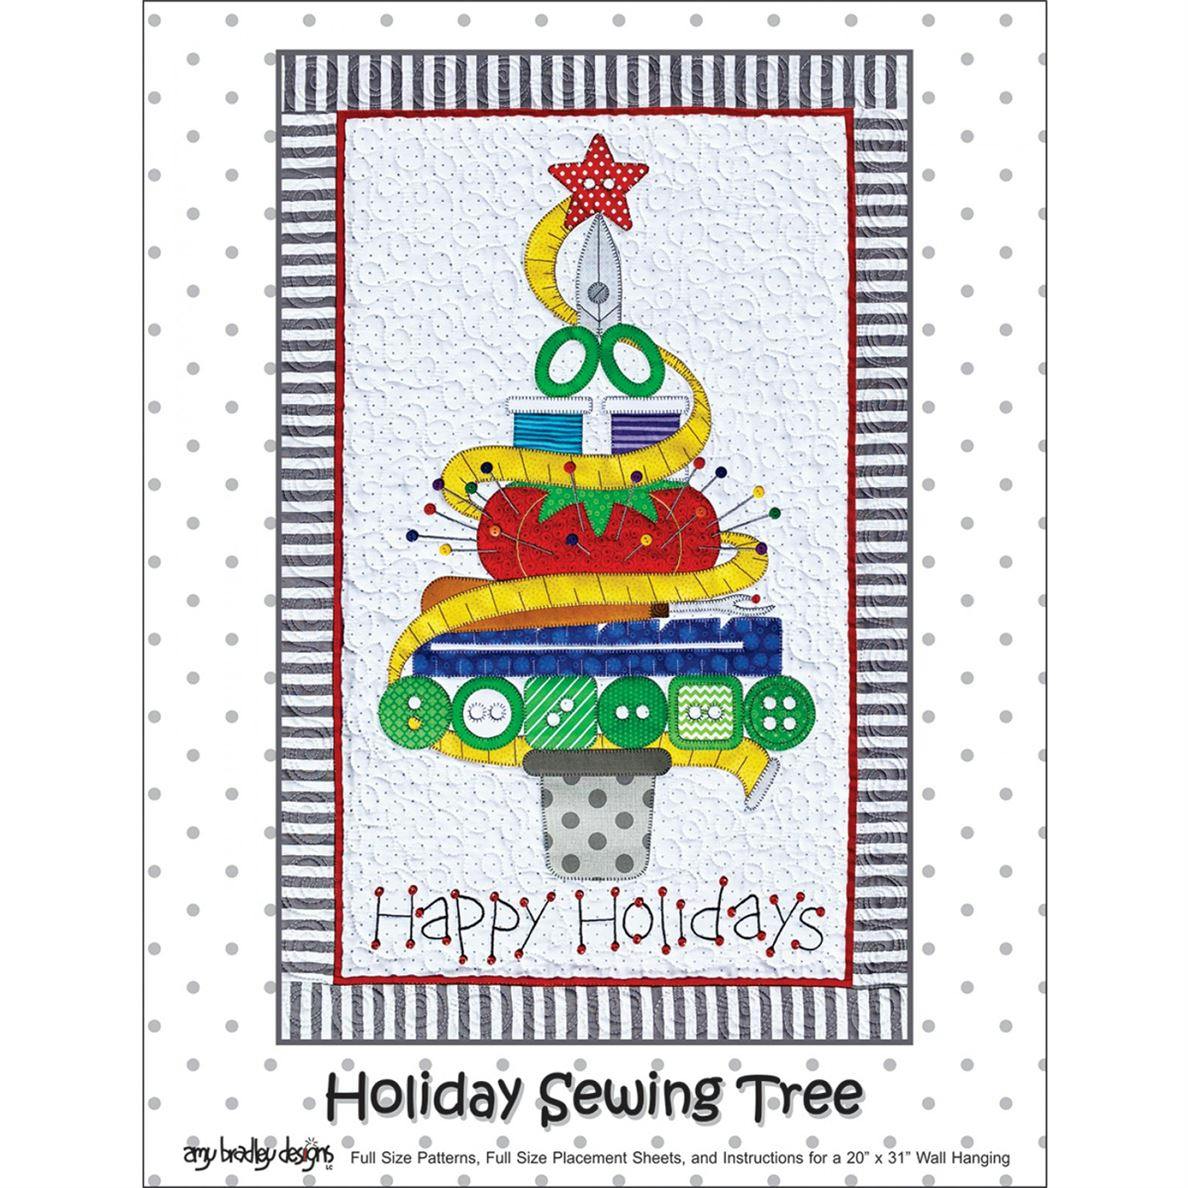 Holiday Sewing Tree pattern